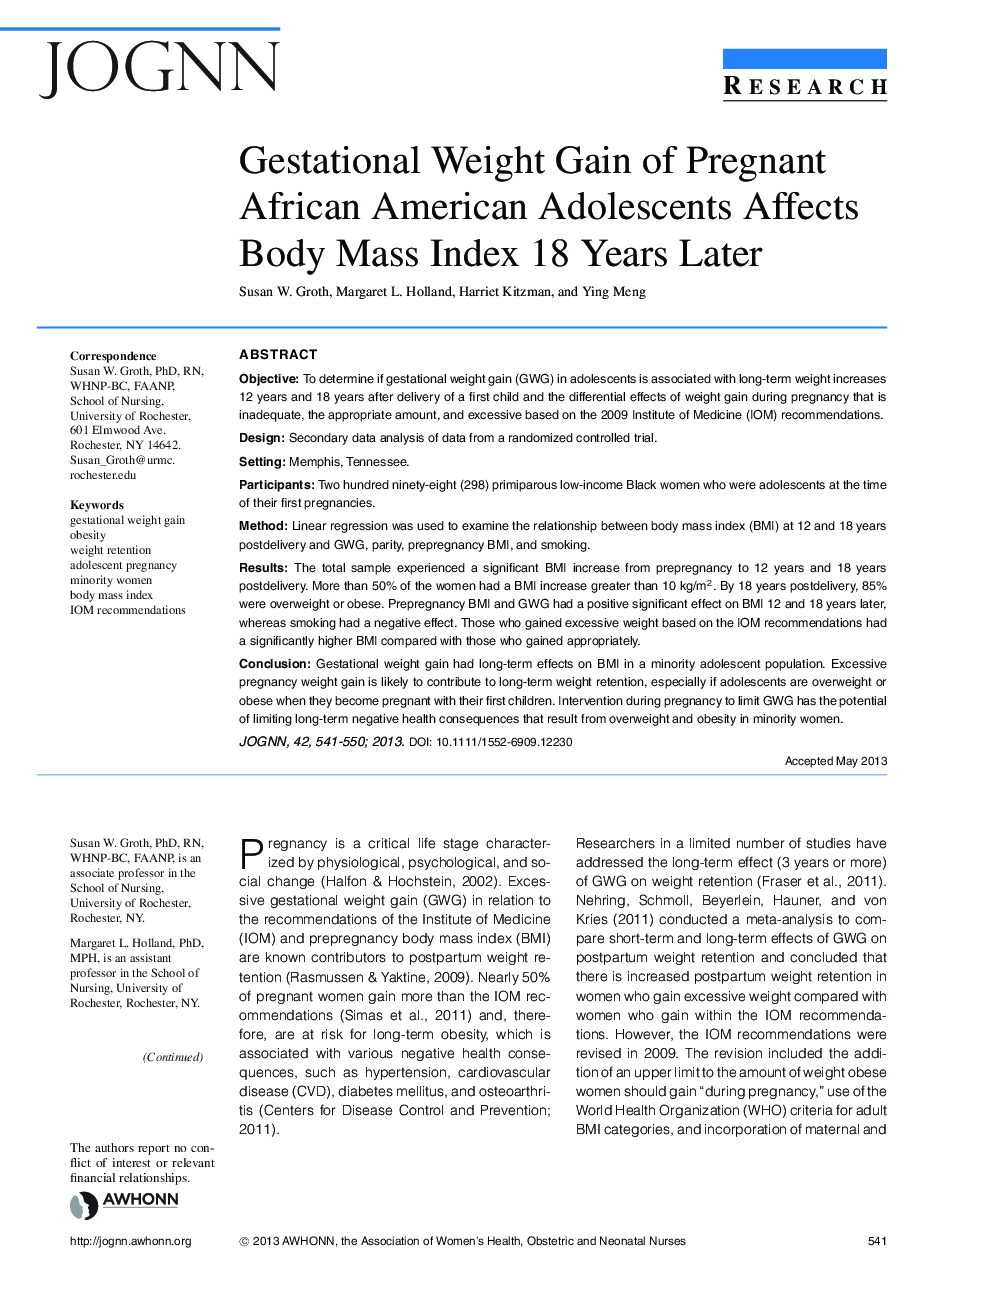 Gestational Weight Gain of Pregnant African American Adolescents Affects Body Mass Index 18Â Years Later